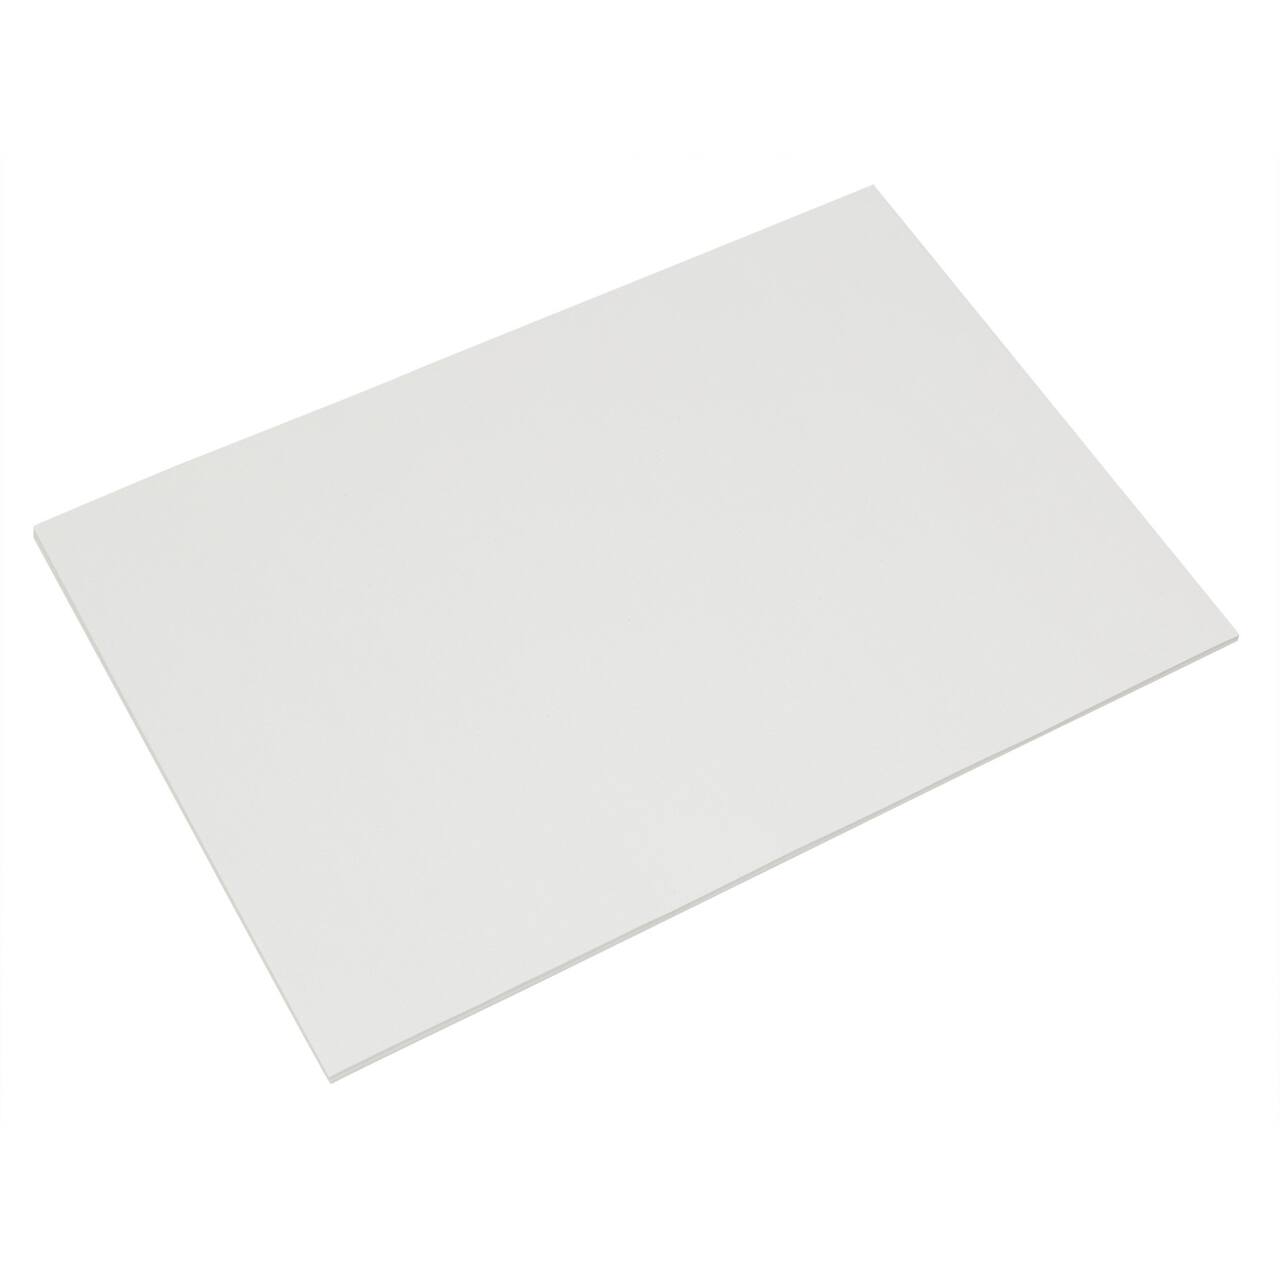 Giant Finger Paint Paper, 25 Painting Paper Sheets